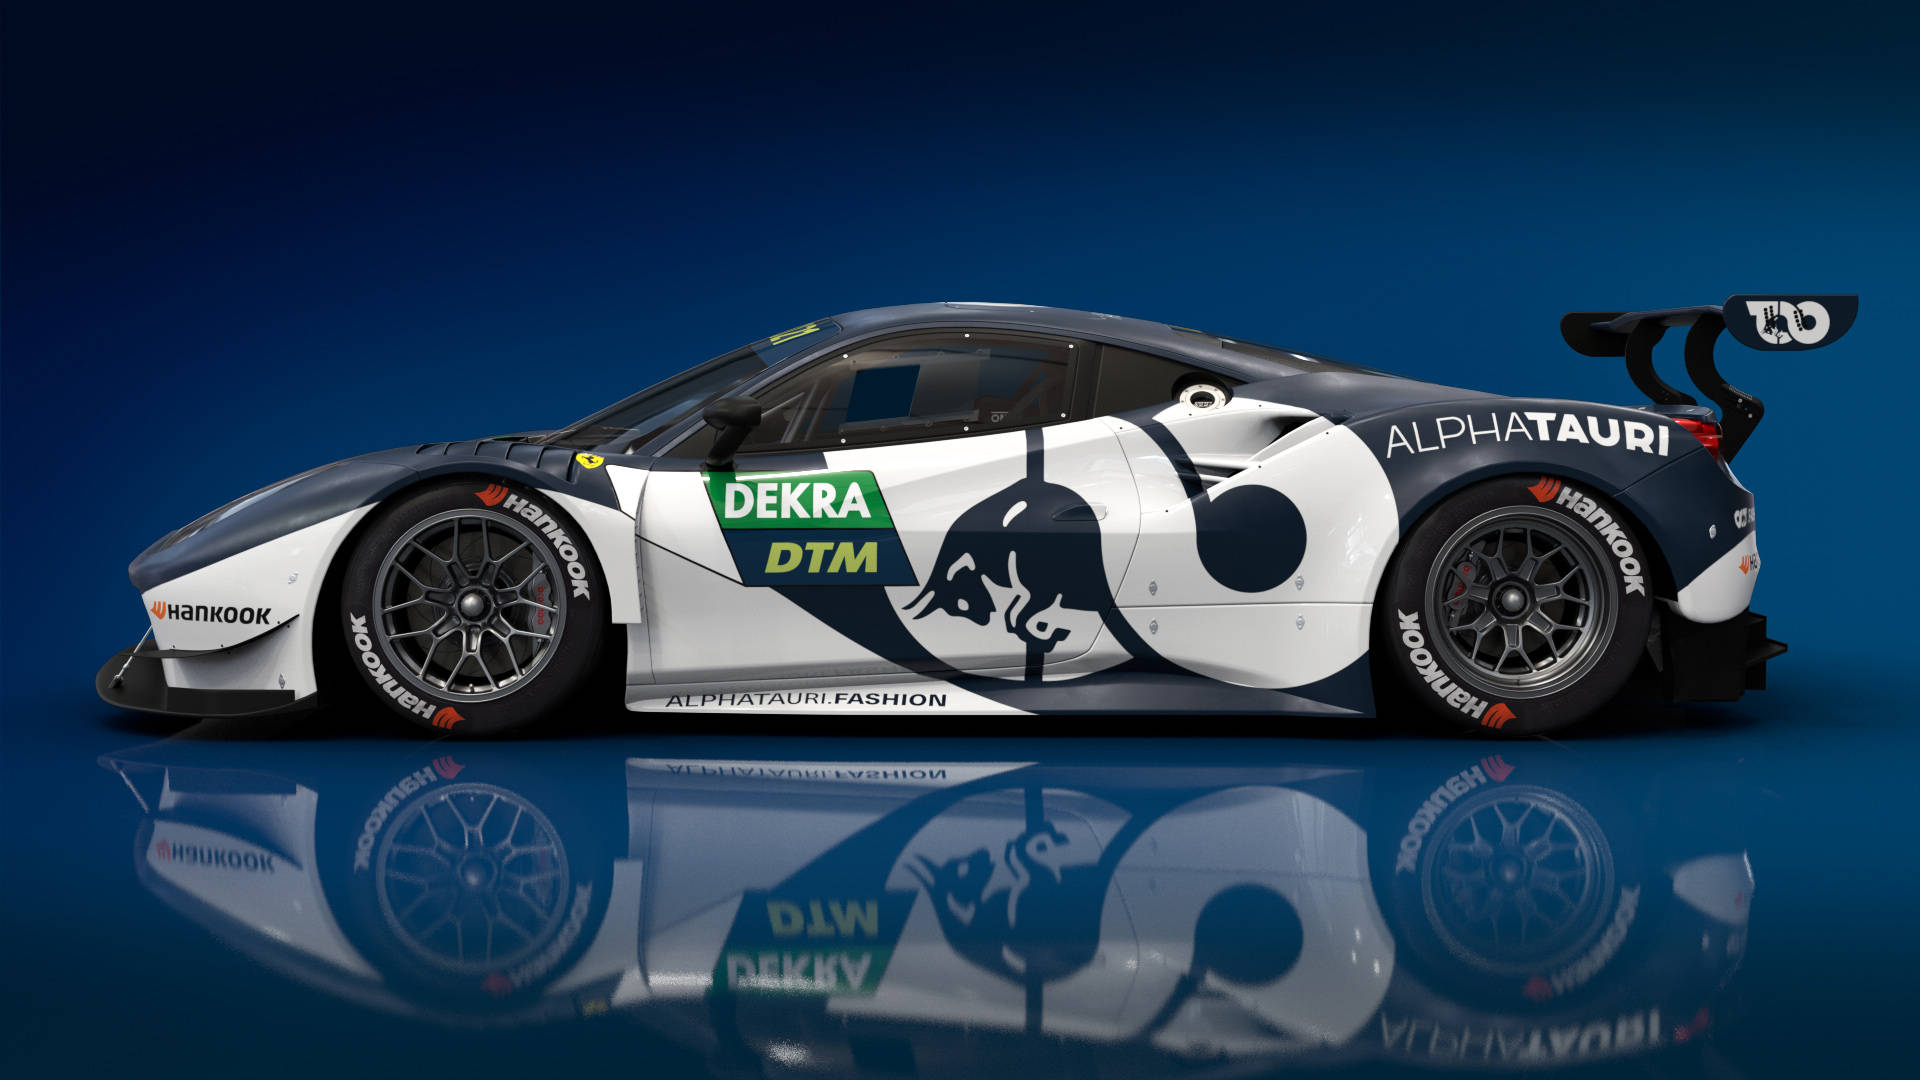 Alexanderalbon Dtm Car In Italian Could Be Translated As 